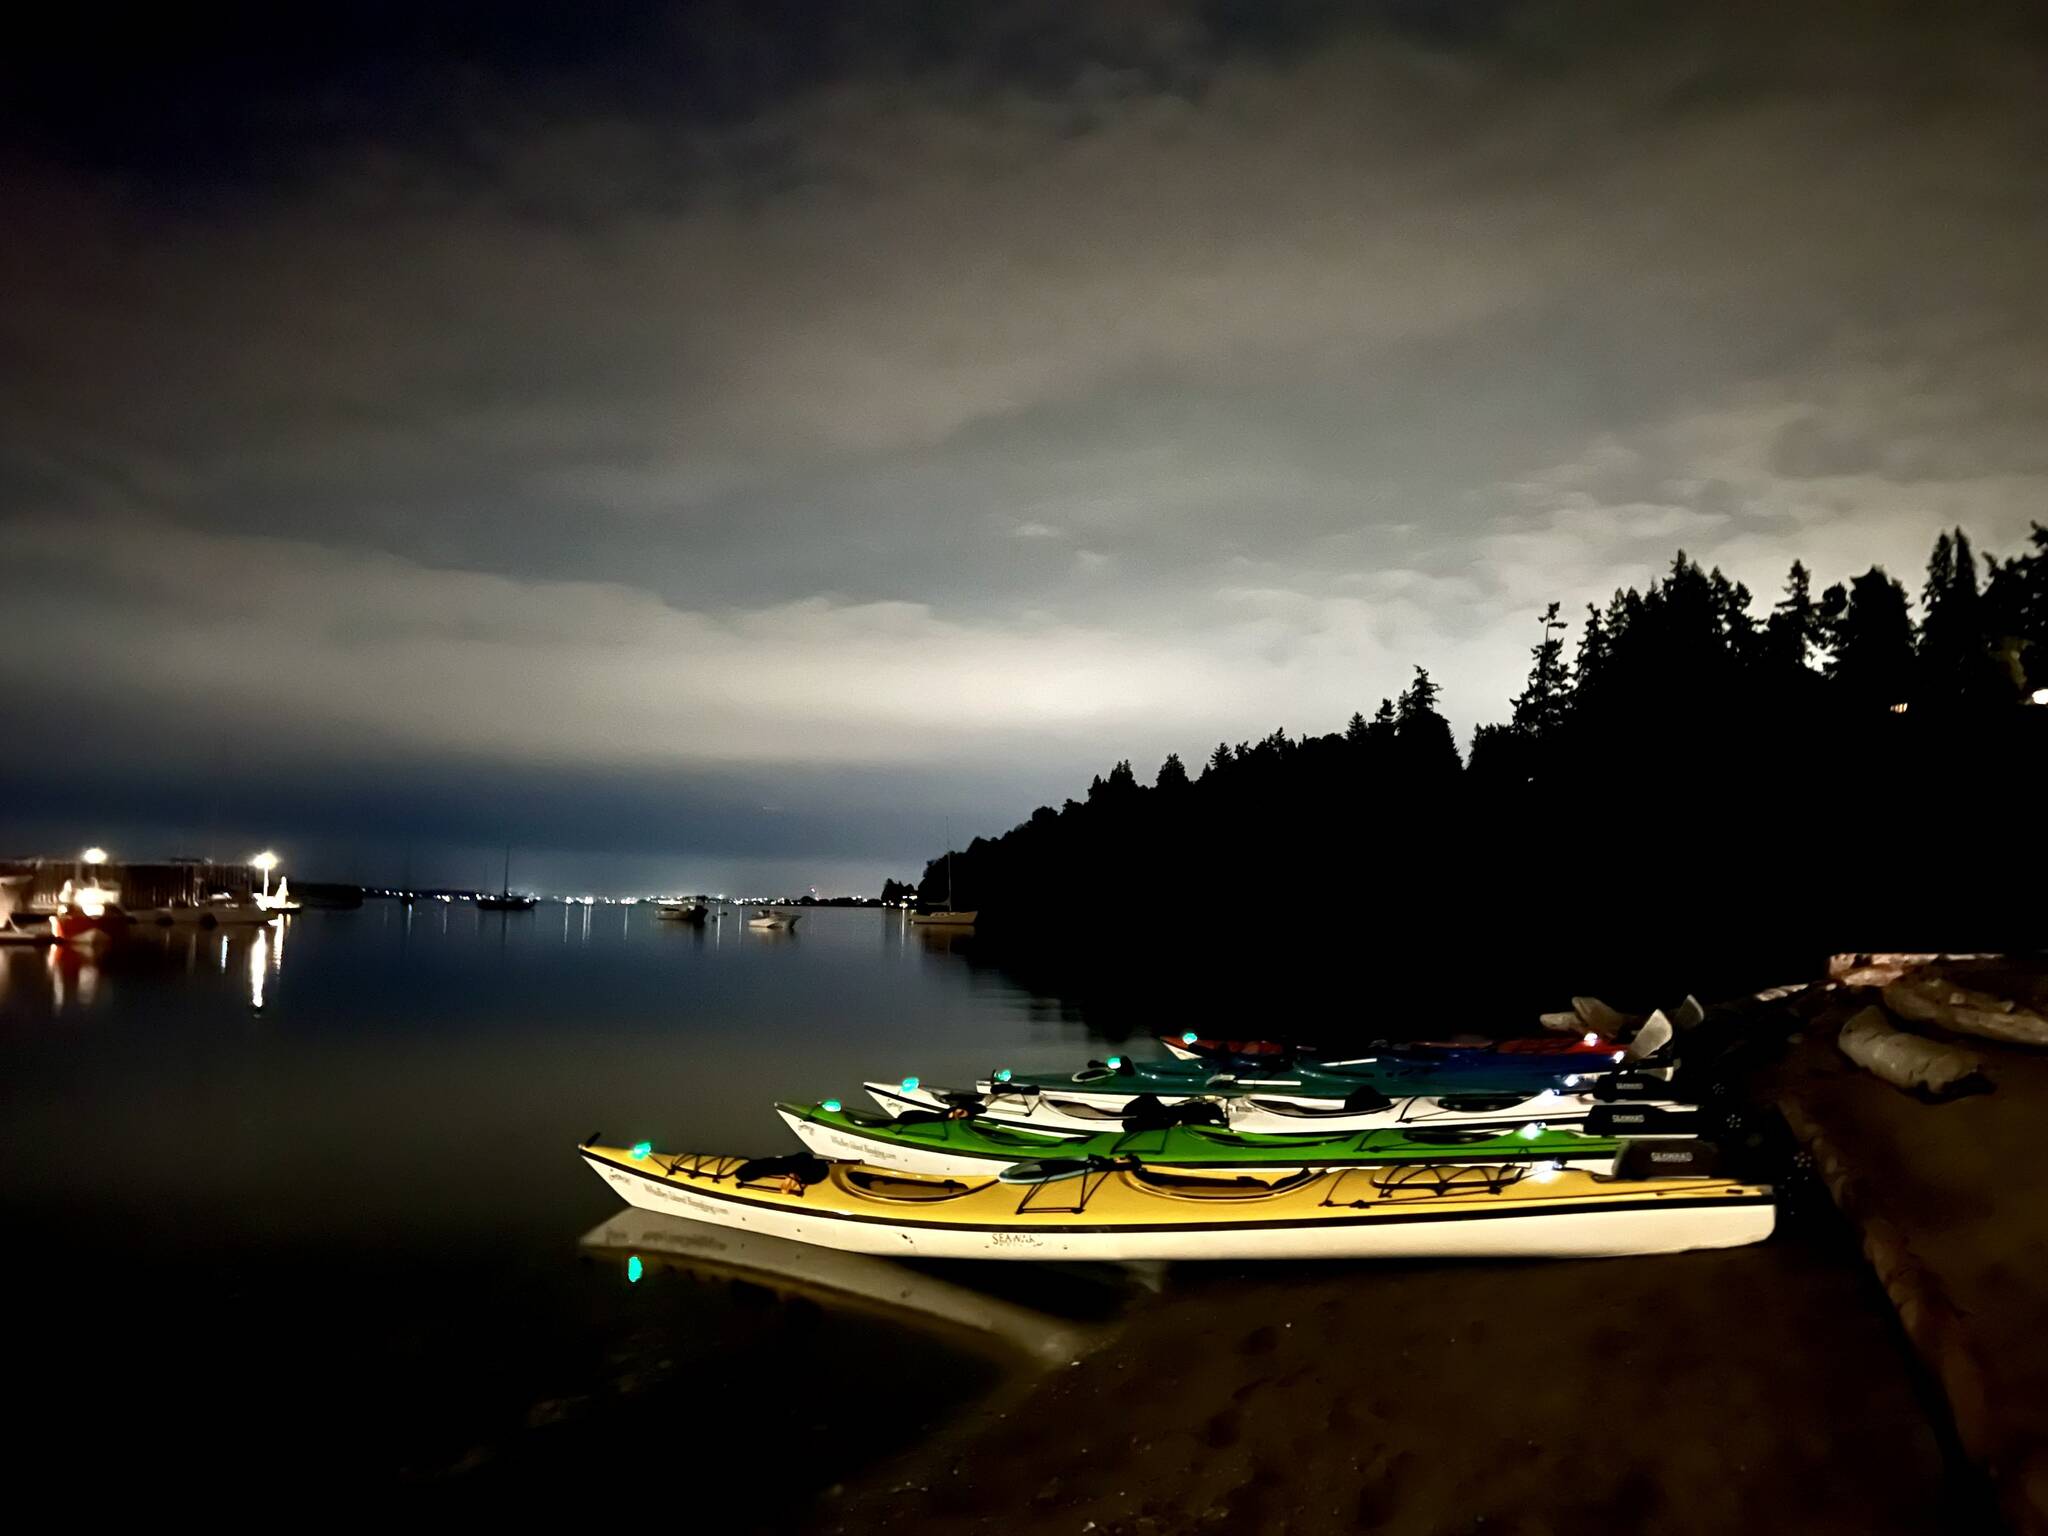 Photo provided
Whidbey Island Kayaking chooses the darkest nights to hold their bioluminescence tours.